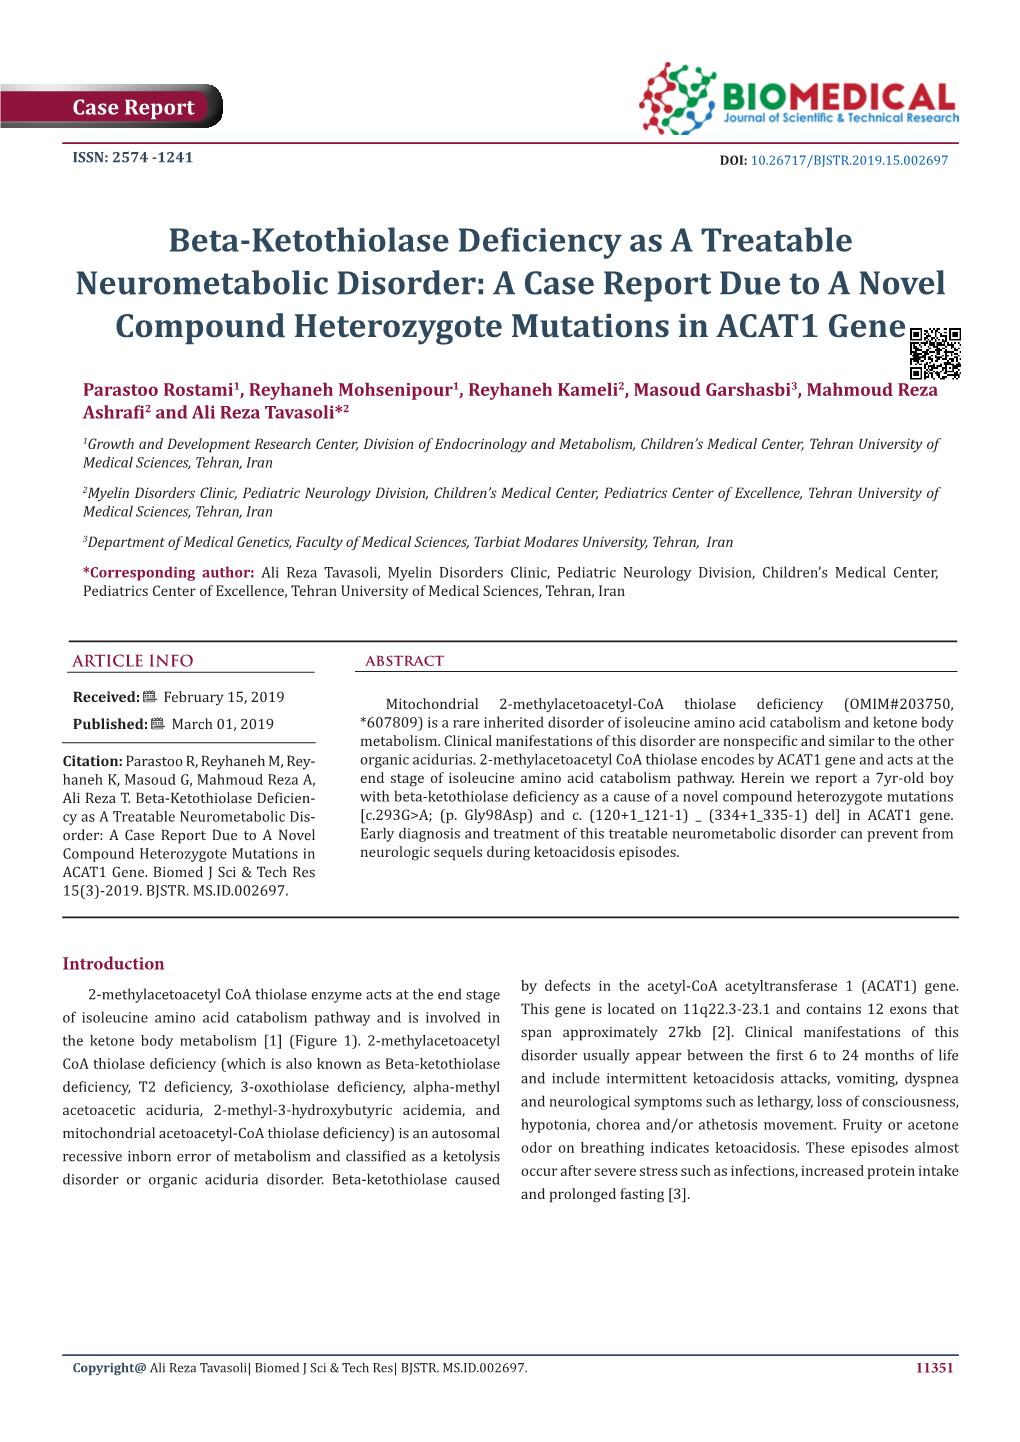 Beta-Ketothiolase Deficiency As a Treatable Neurometabolic Disorder: a Case Report Due to a Novel Compound Heterozygote Mutations in ACAT1 Gene